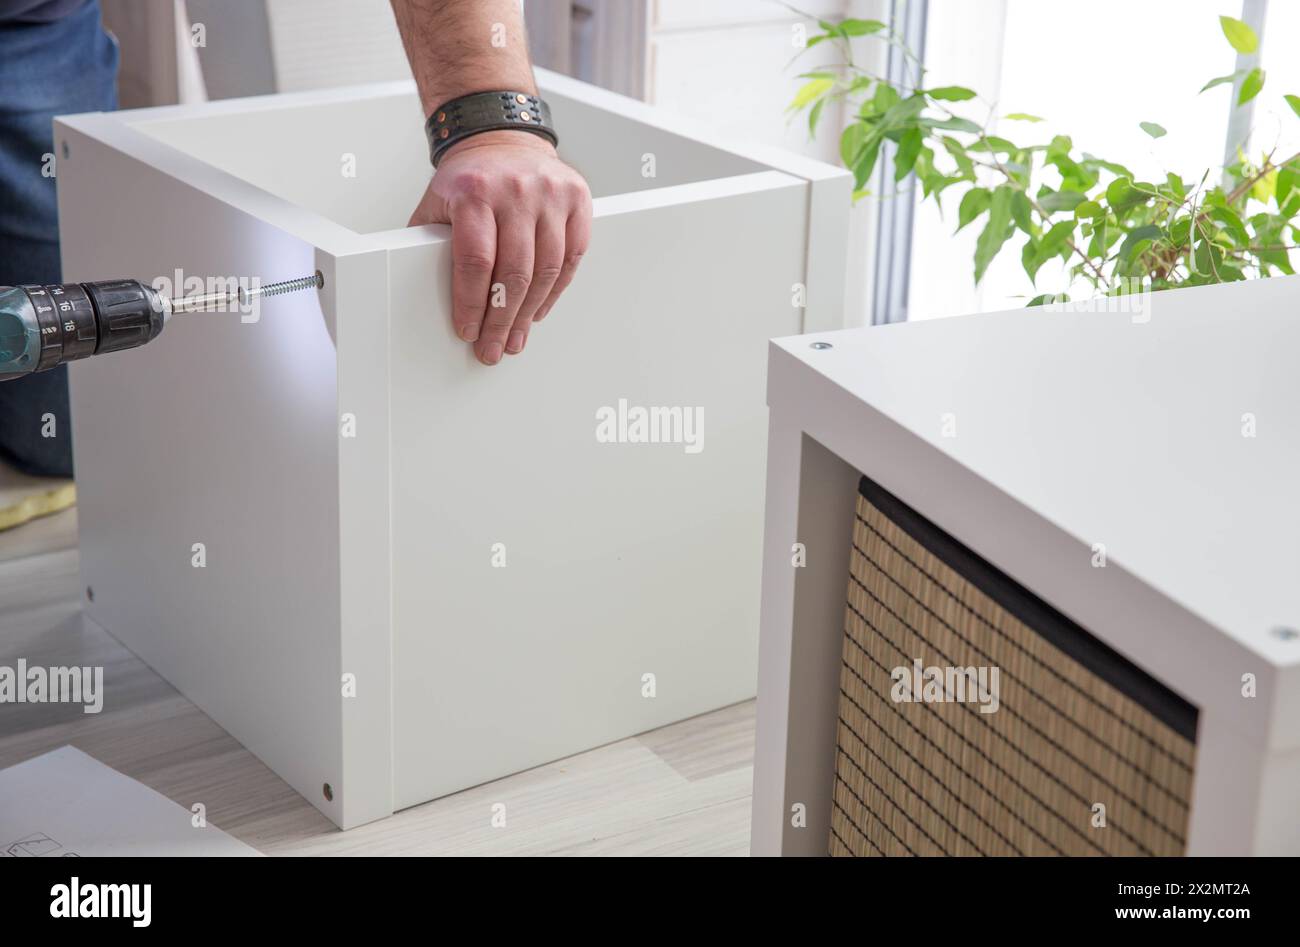 Man assembling purchased furniture in room with window. Concept DIY or furniture assembly services Stock Photo